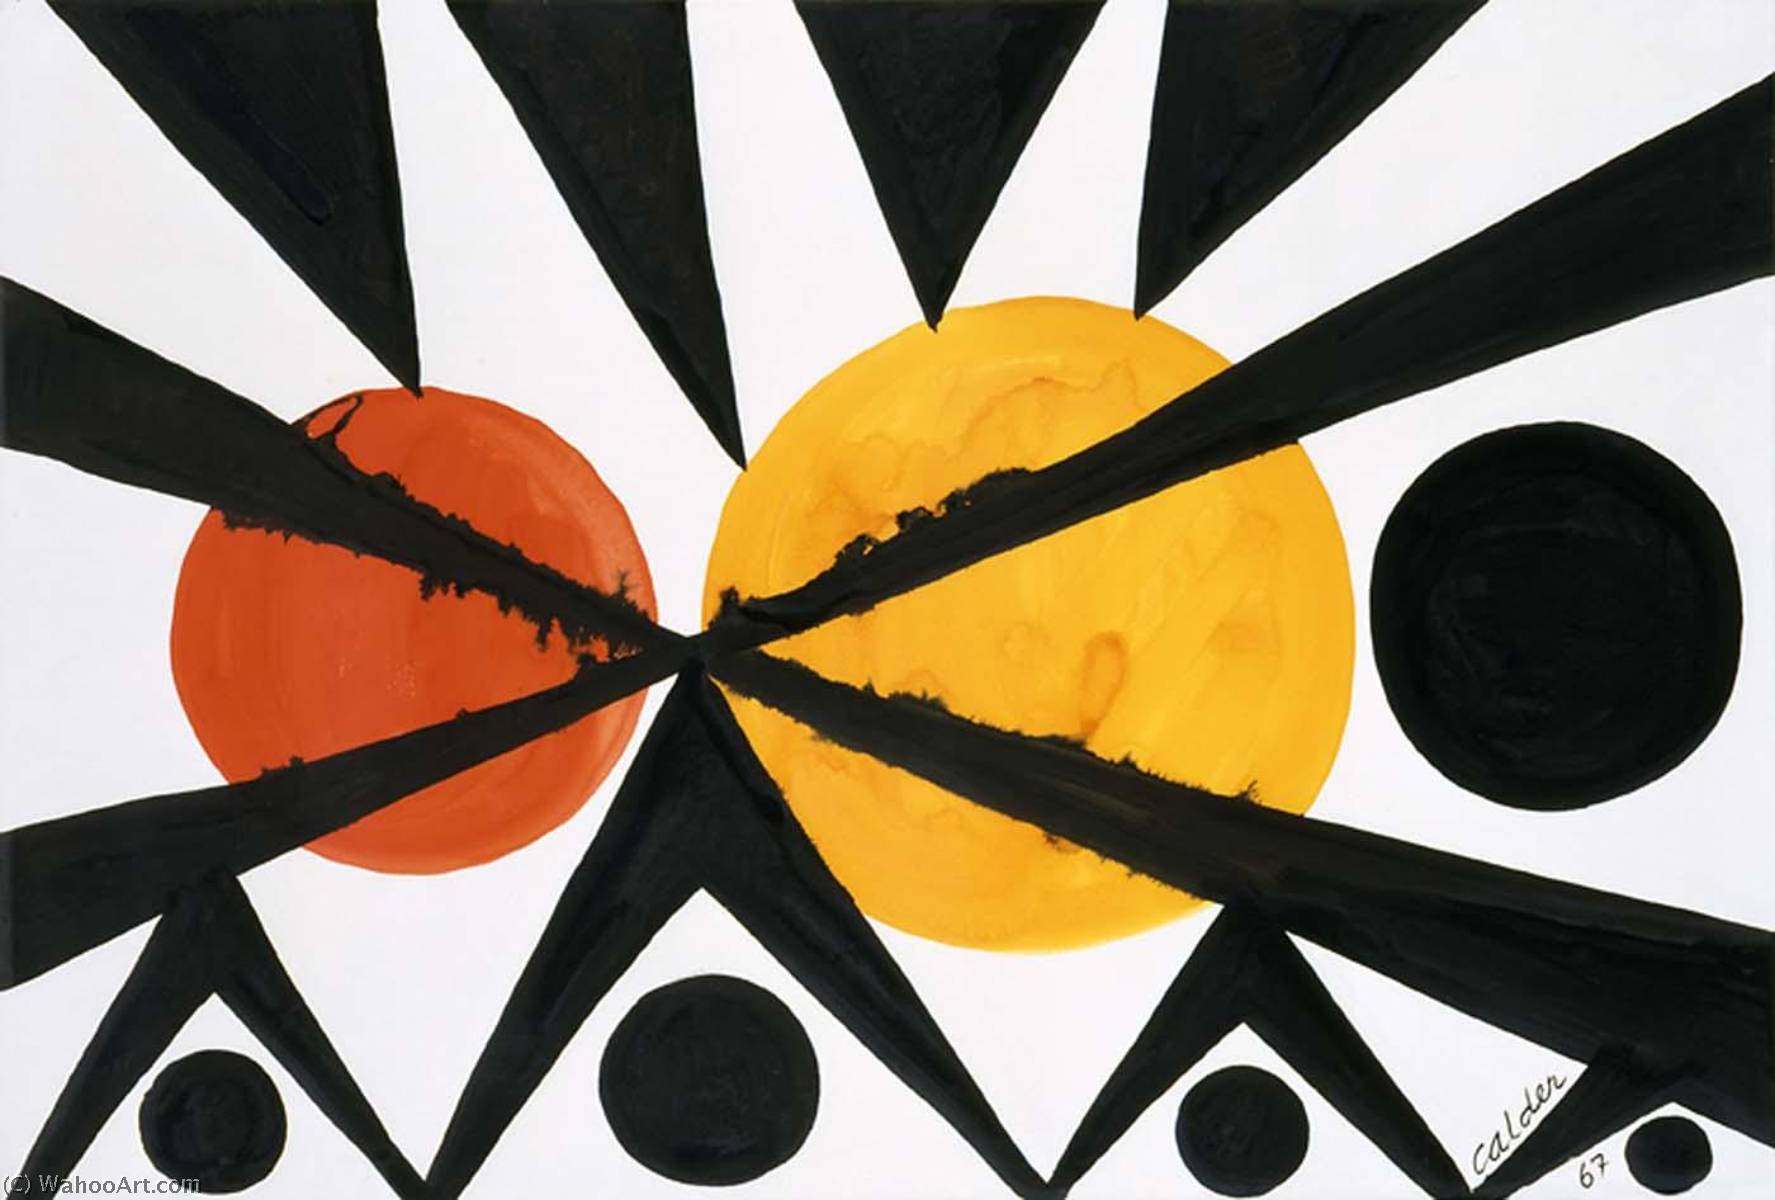 Order Paintings Reproductions Across the Orange Moons, 1967 by Alexander Milne Calder (Inspired By) (1898-1976, United Kingdom) | ArtsDot.com